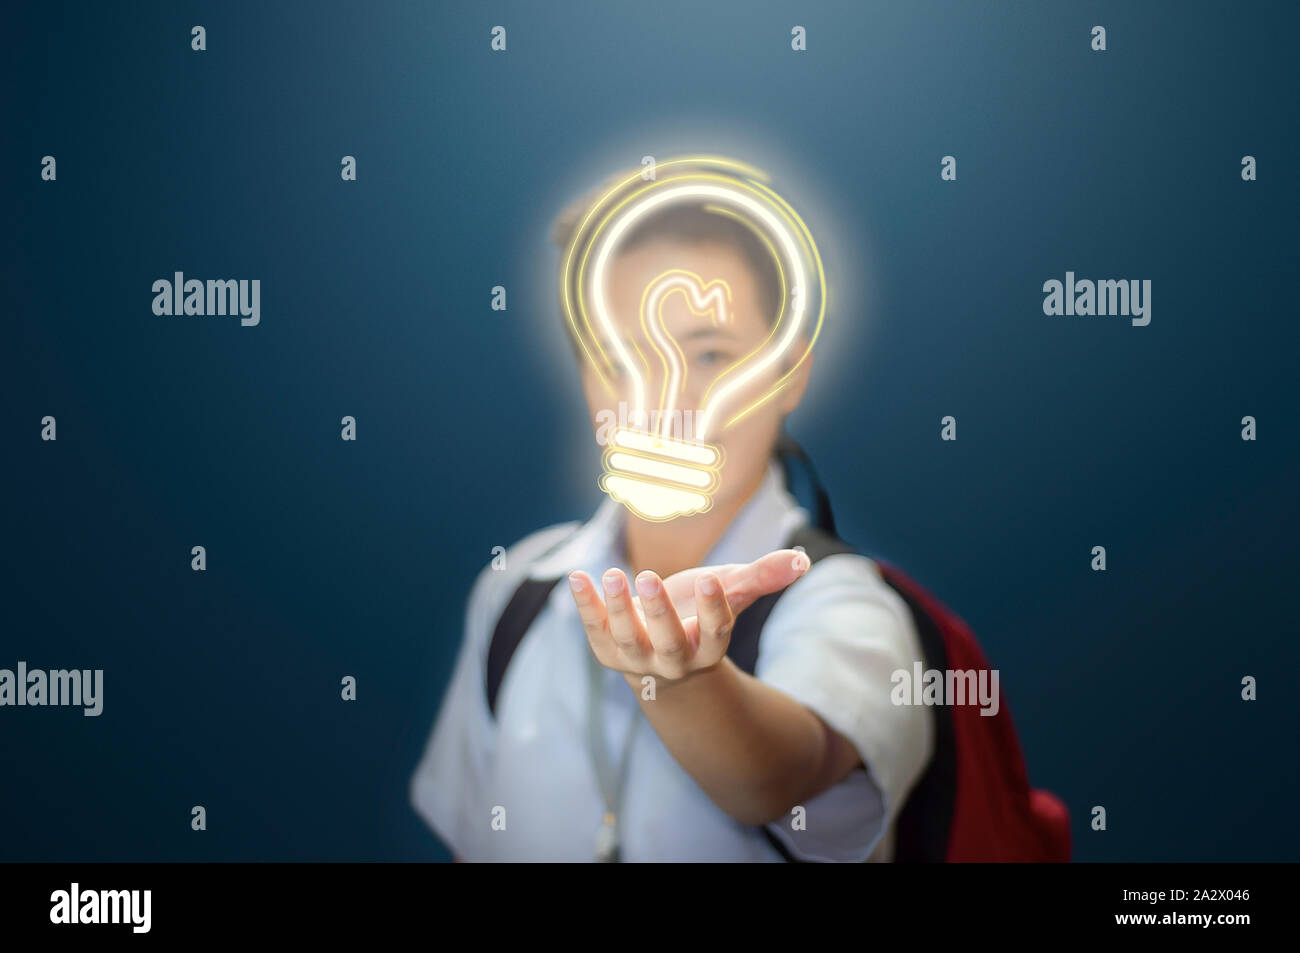 Young boy giving an idea. Student showing a light bulb to present an idea, Stock Photo